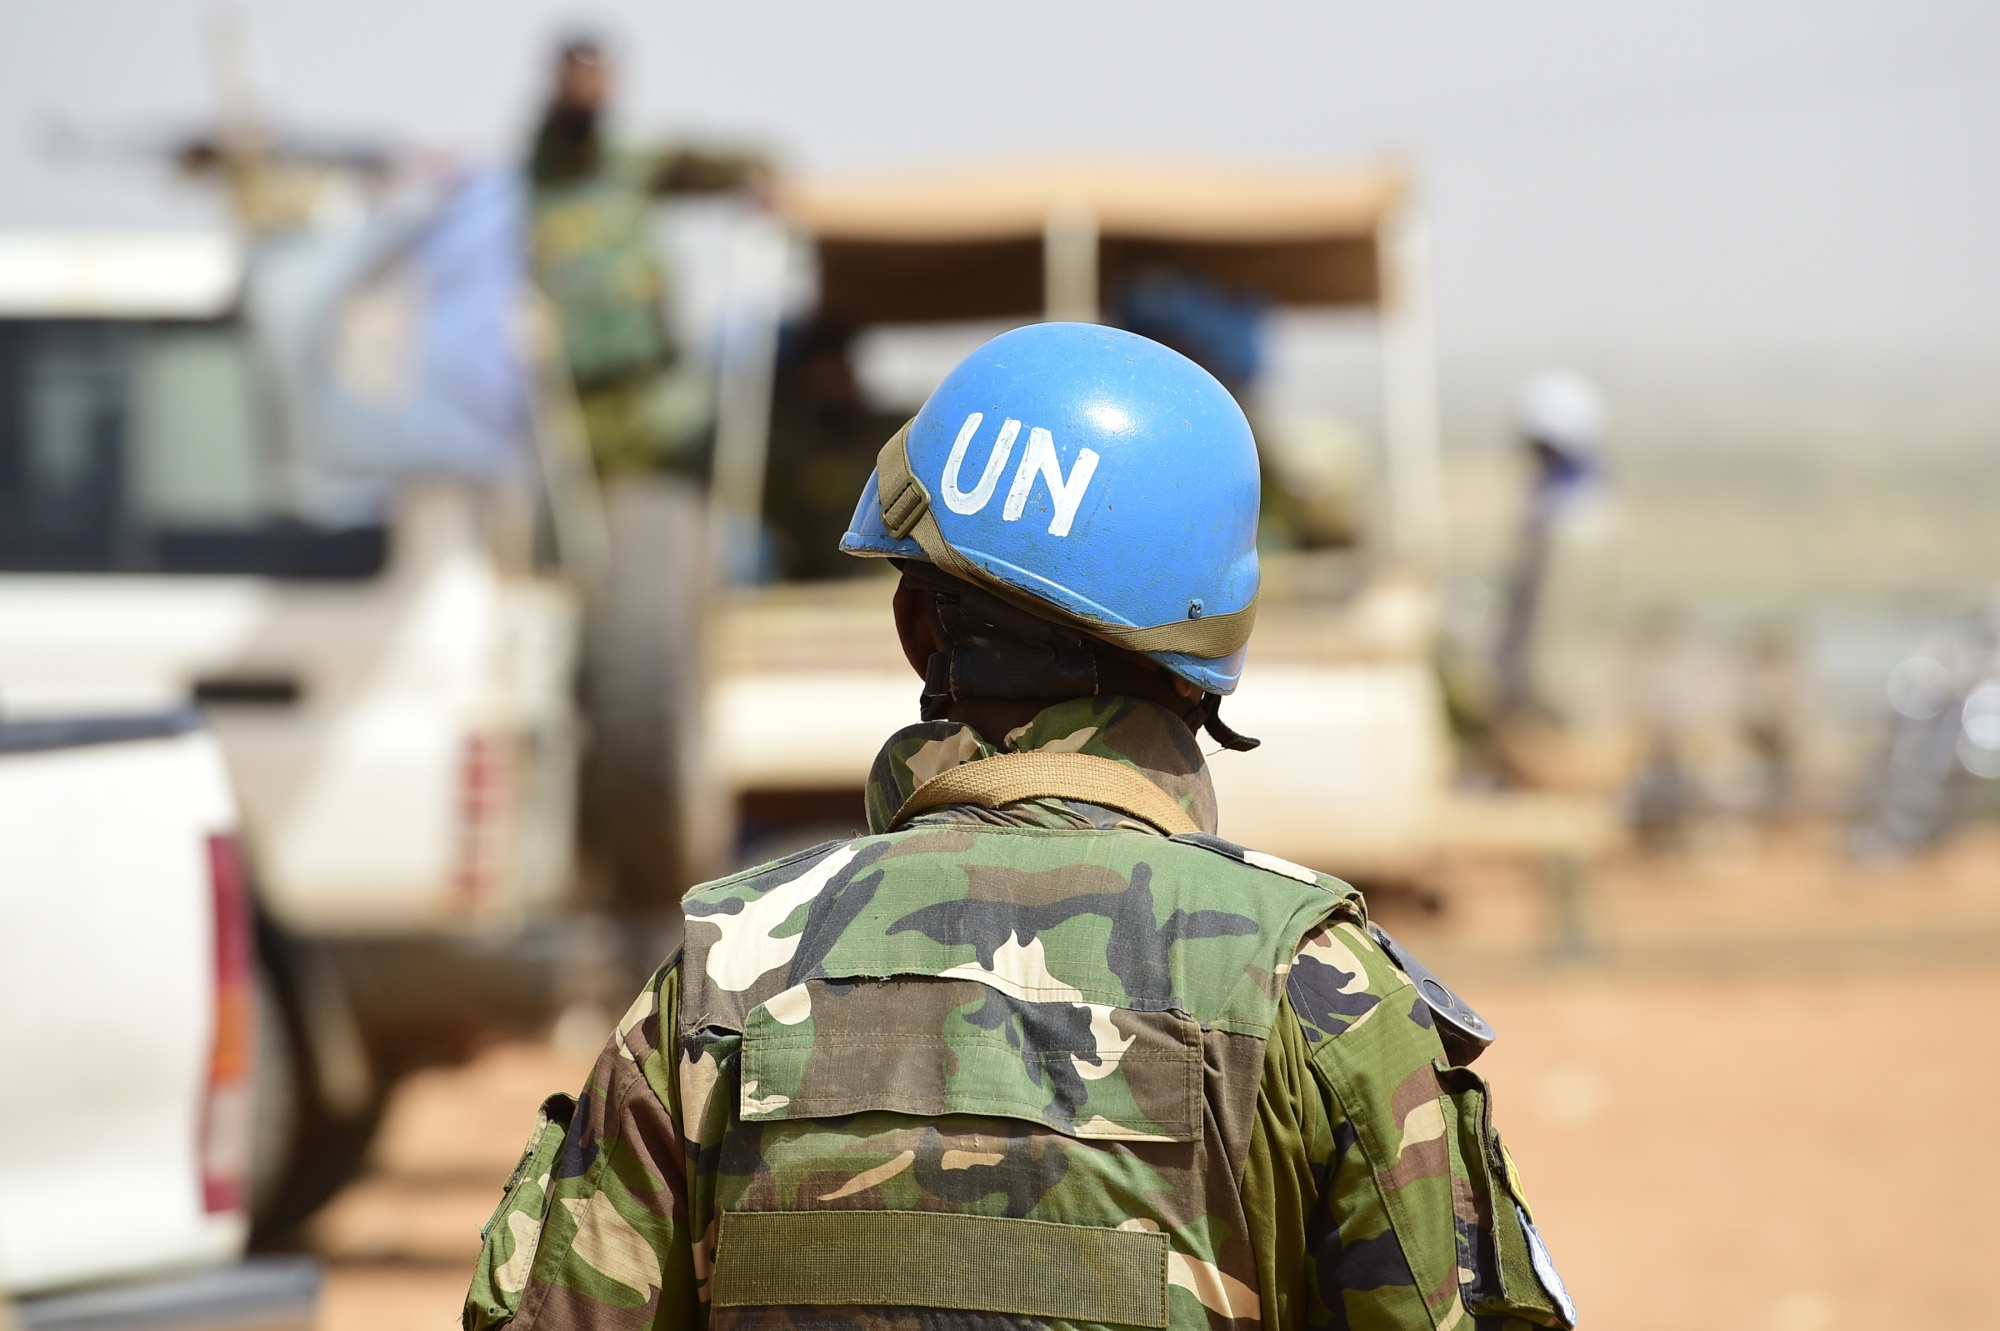 UN Ends Mali Peacekeeping Mission With Wagner Set to Fill Void - Bloomberg